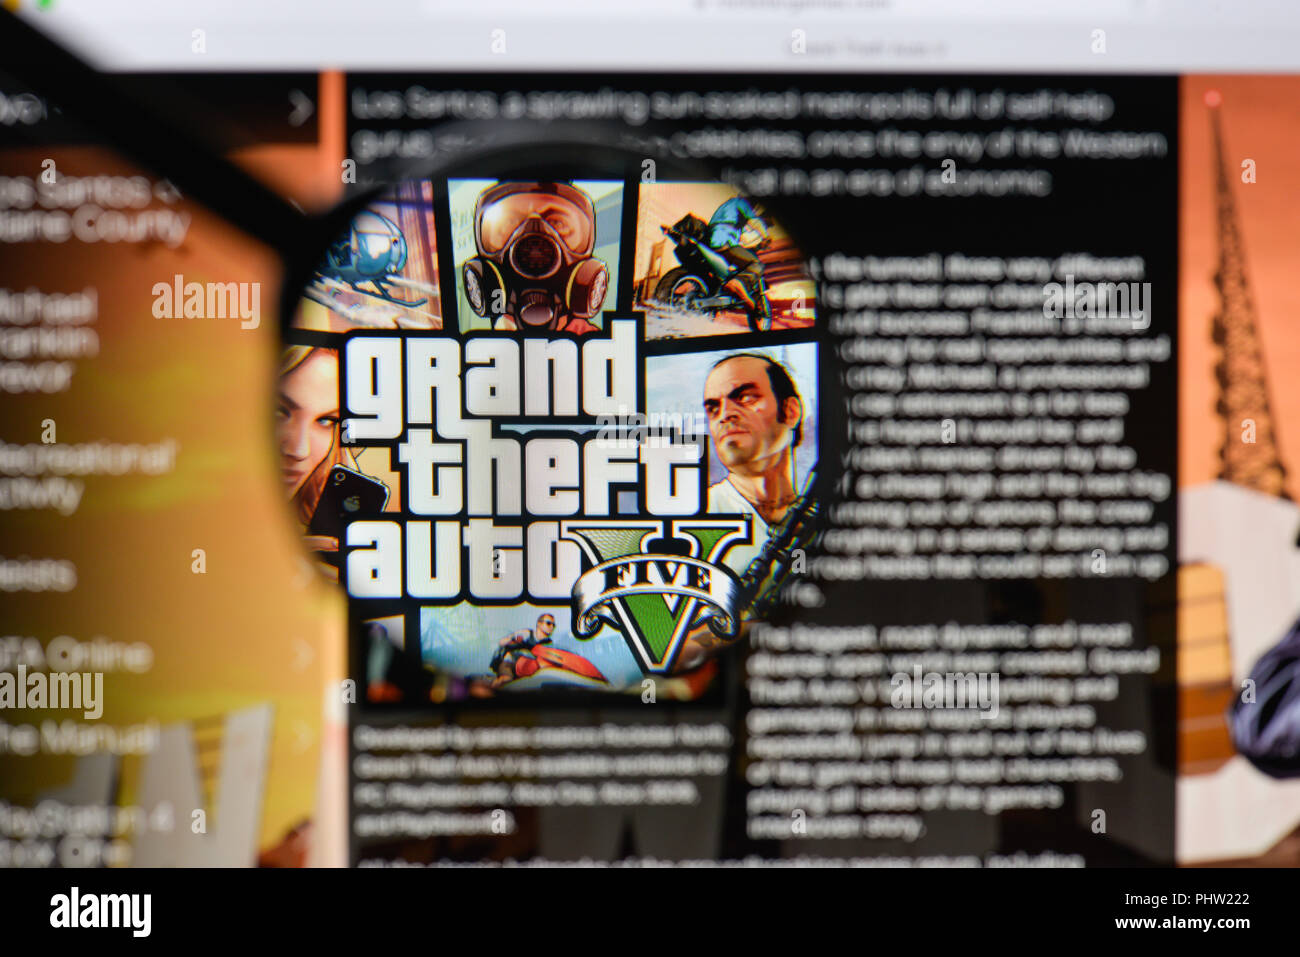 Milan, Italy - August 20, 2018: Grand Theft Auto V website homepage. Grand Theft Auto V logo visible. Stock Photo